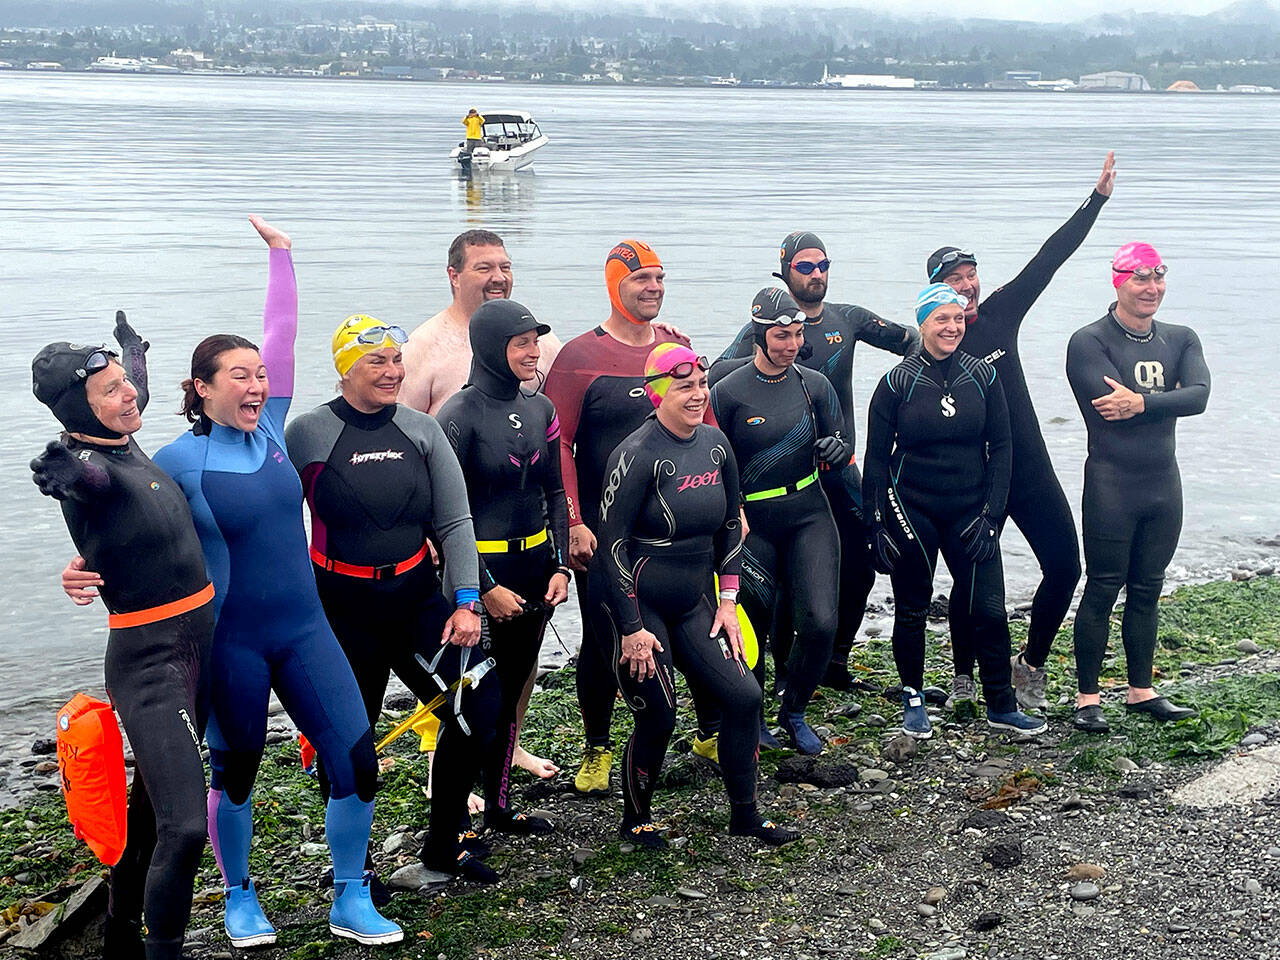 Participants in the Maritime Festival’s Orca Bait Swim pump themselves up on Ediz Hook before heading out across the harbor. The inaugural event drew 12 swimmers and three orcas, whose paths did not happen to meet over the 1 1/2-mile course. (Paula Hunt/Peninsula Daily News)